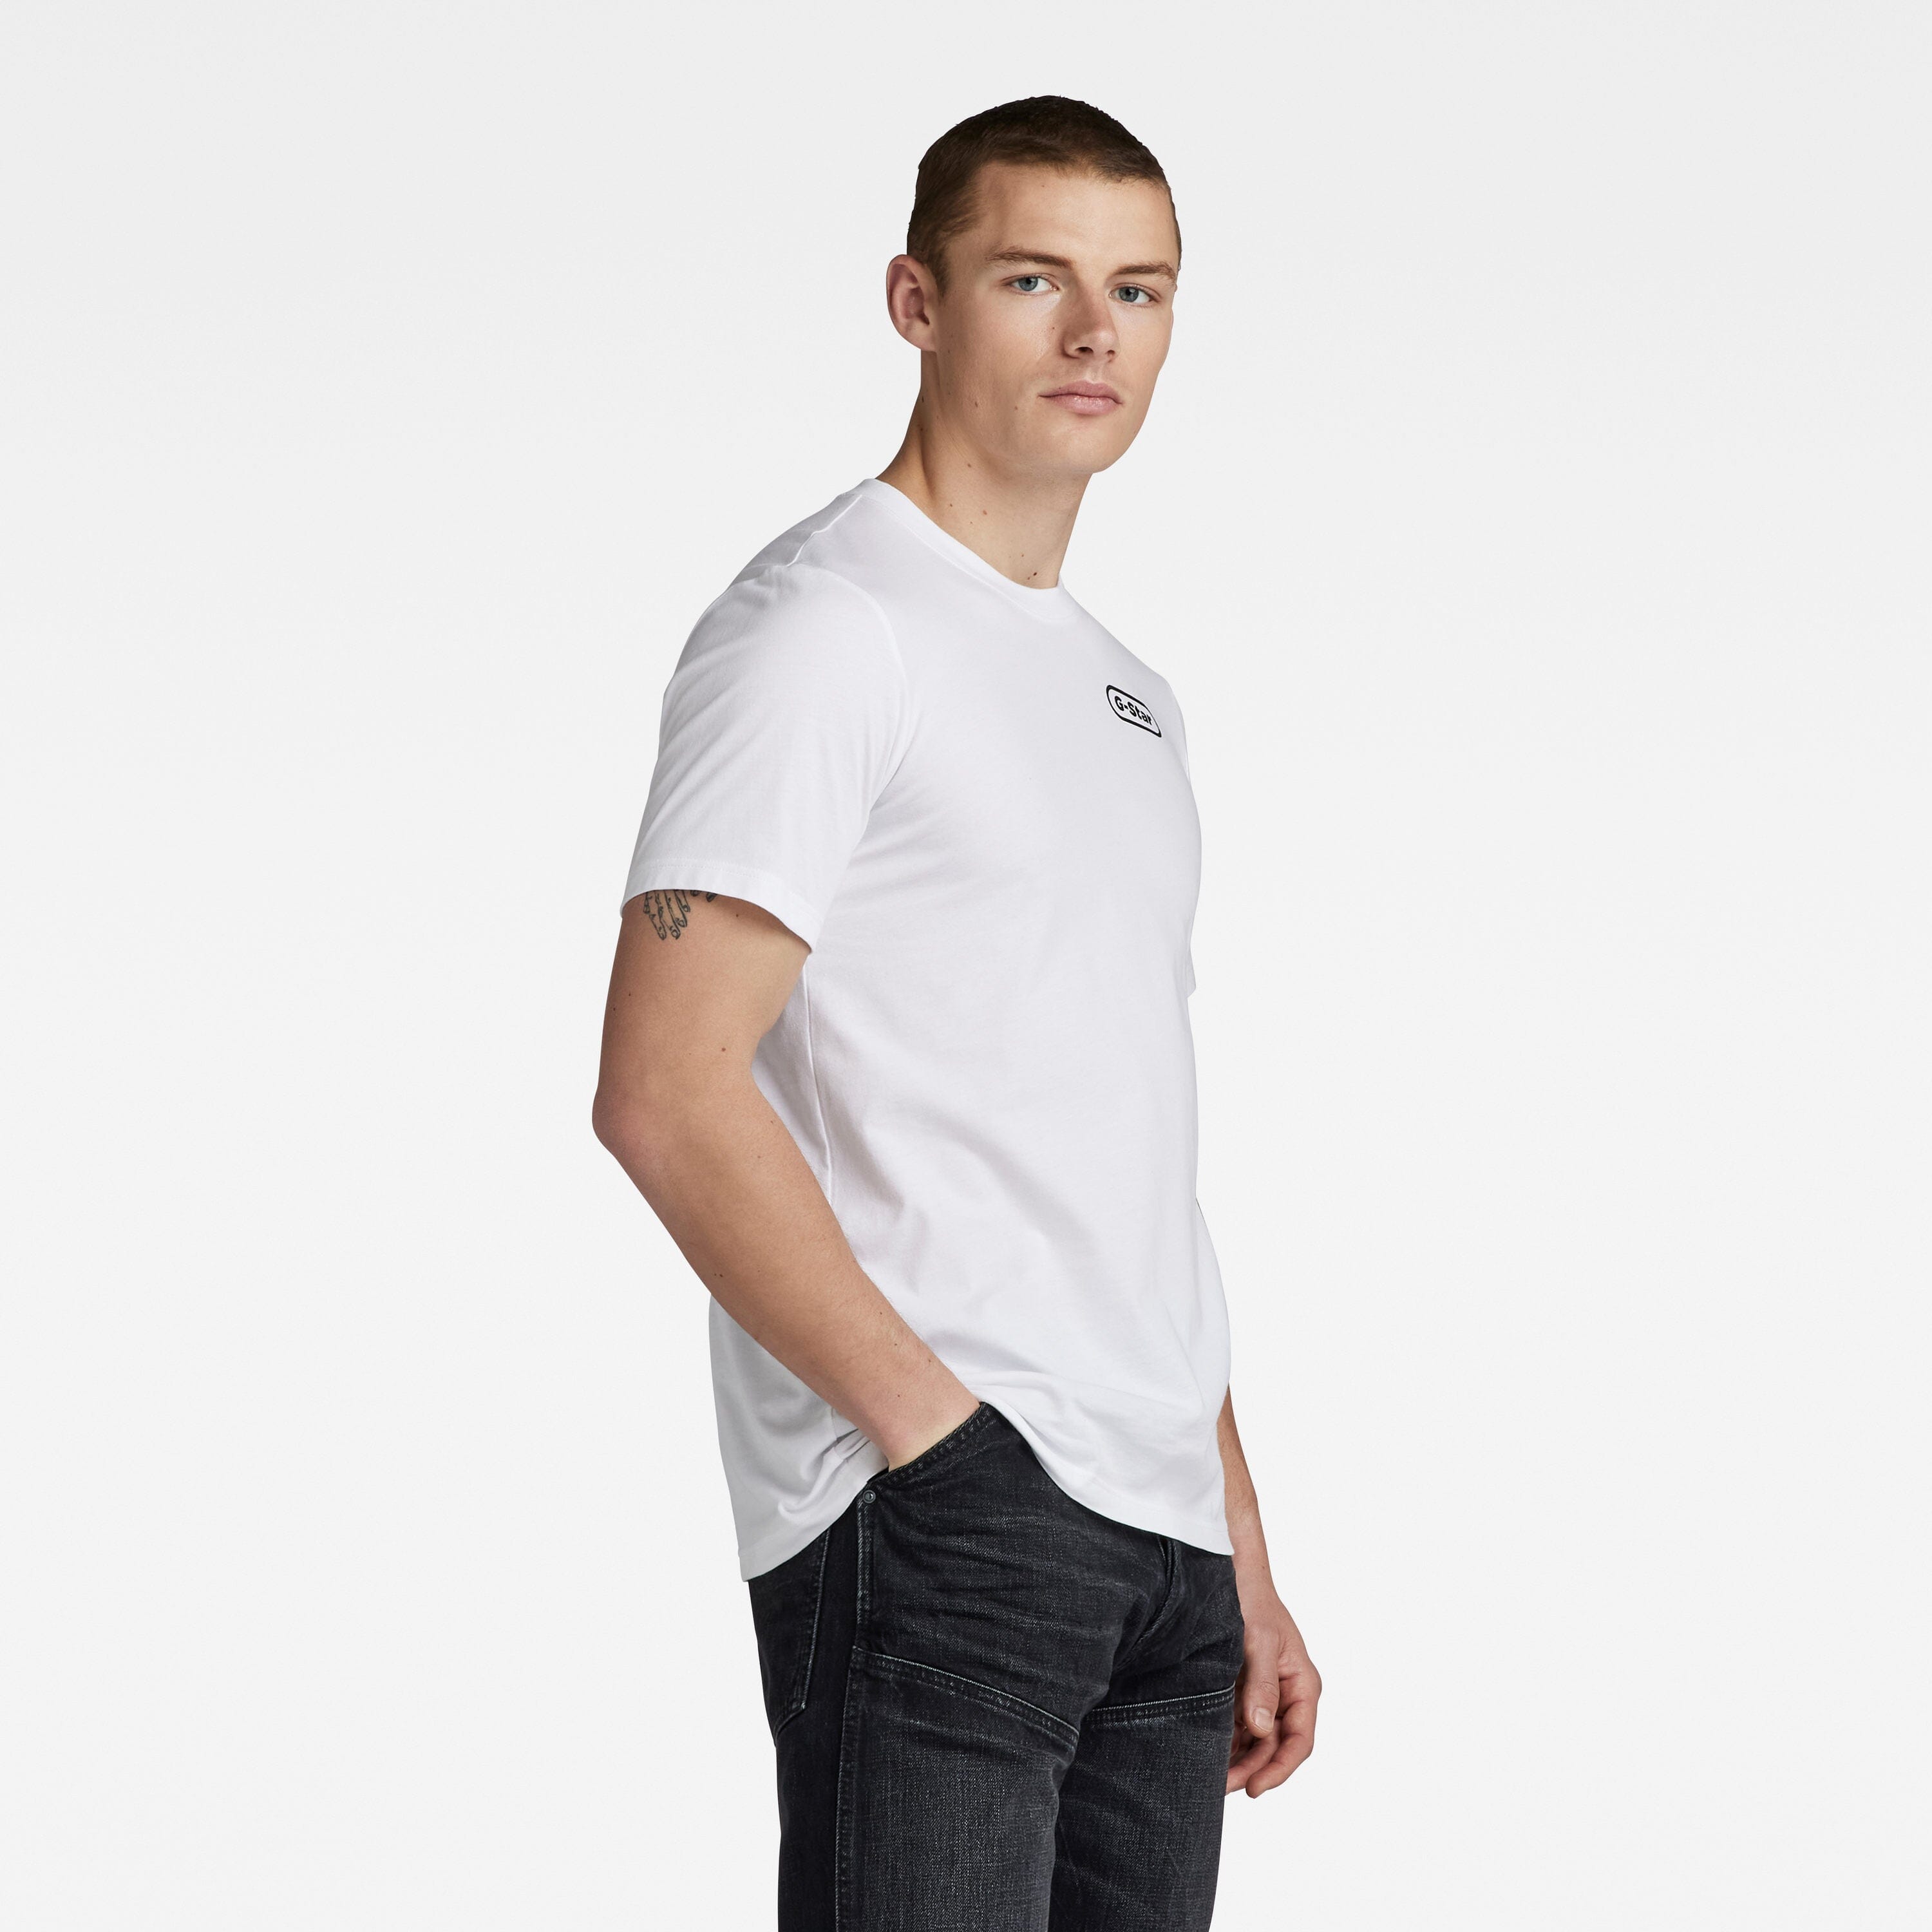 Tightly knitted With the collection of t-shirts by G-Star RAW